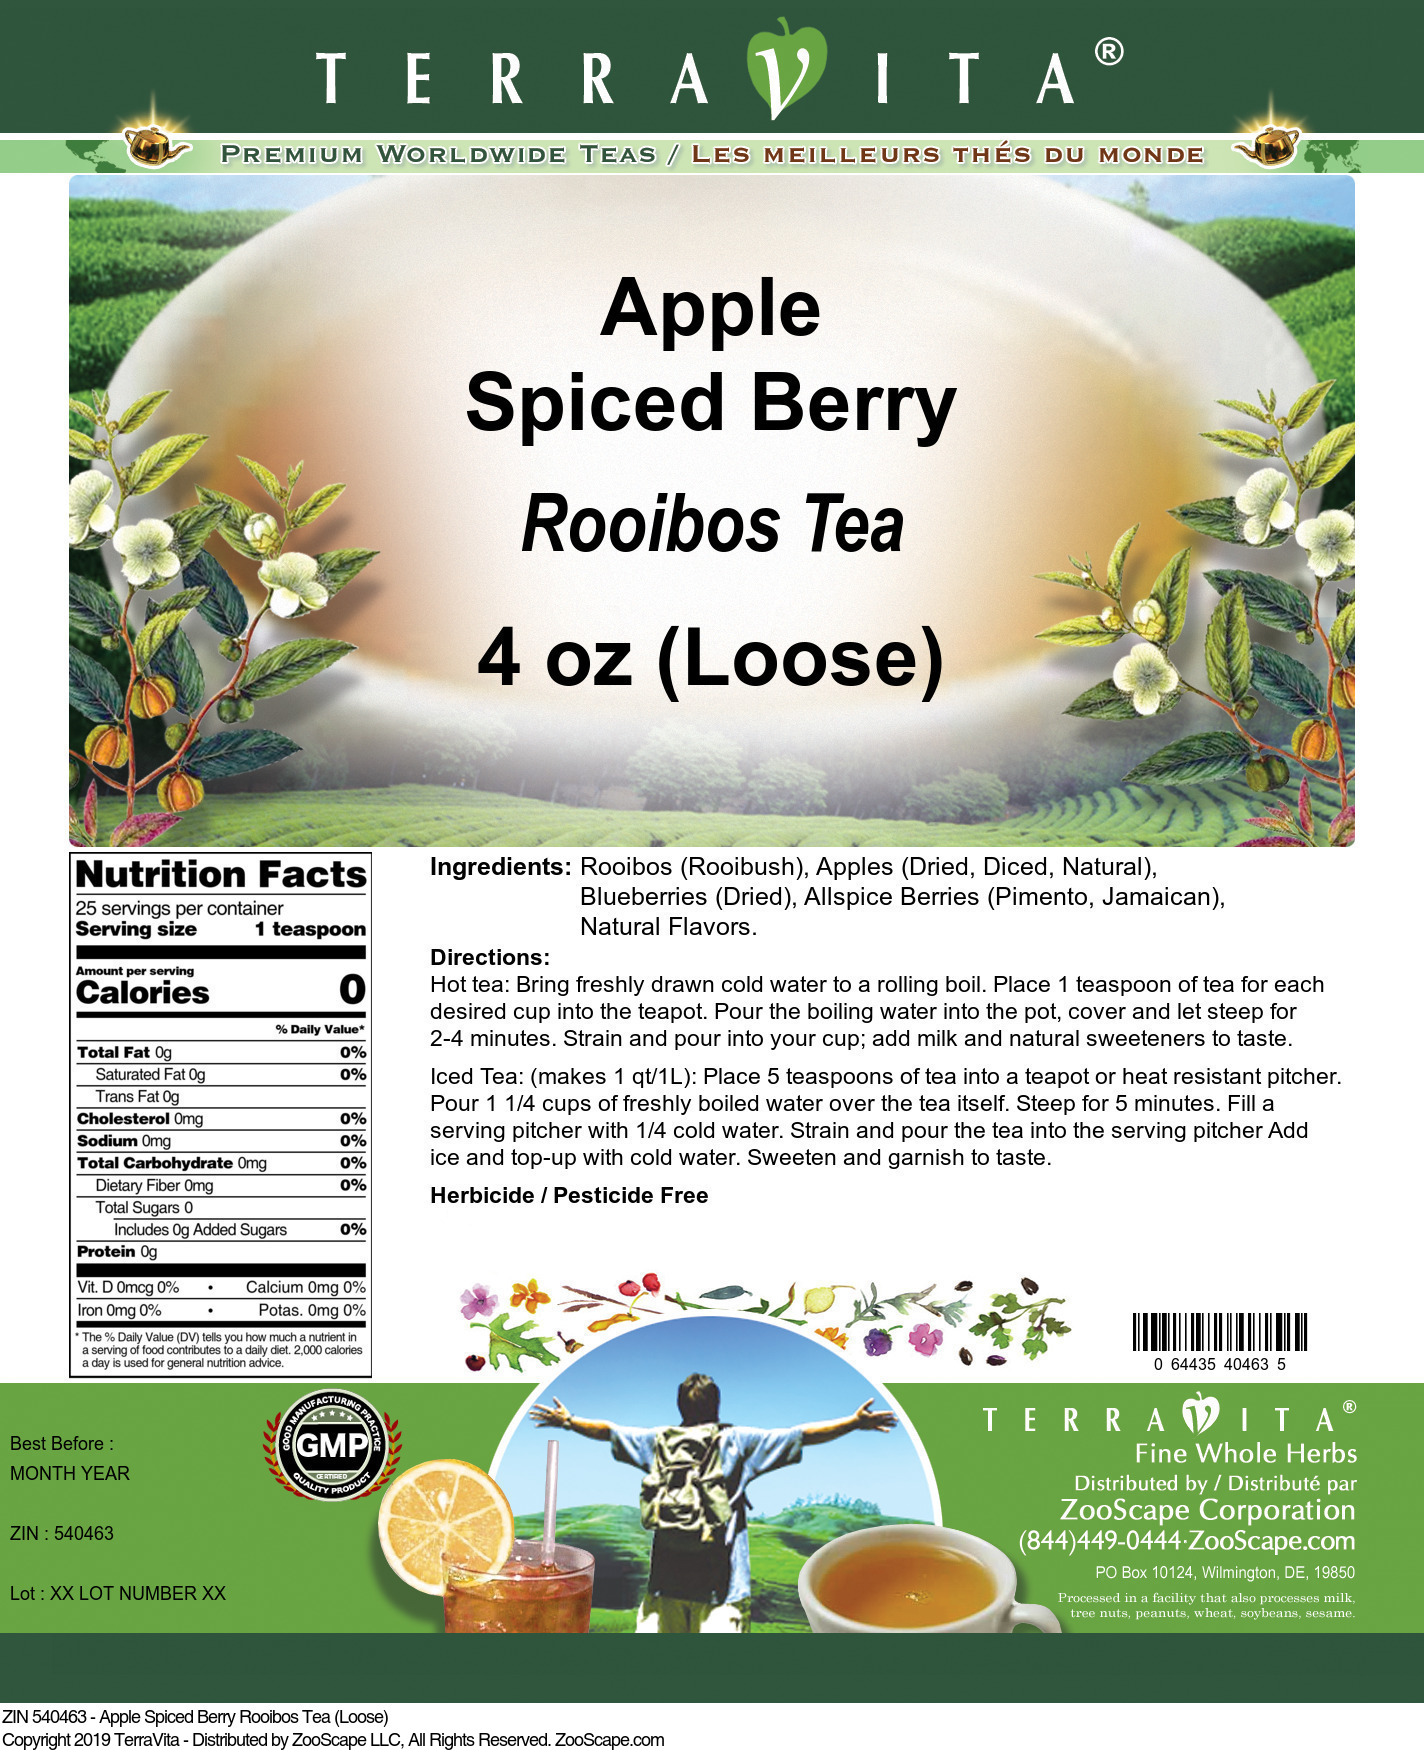 Apple Spiced Berry Rooibos Tea (Loose) - Label